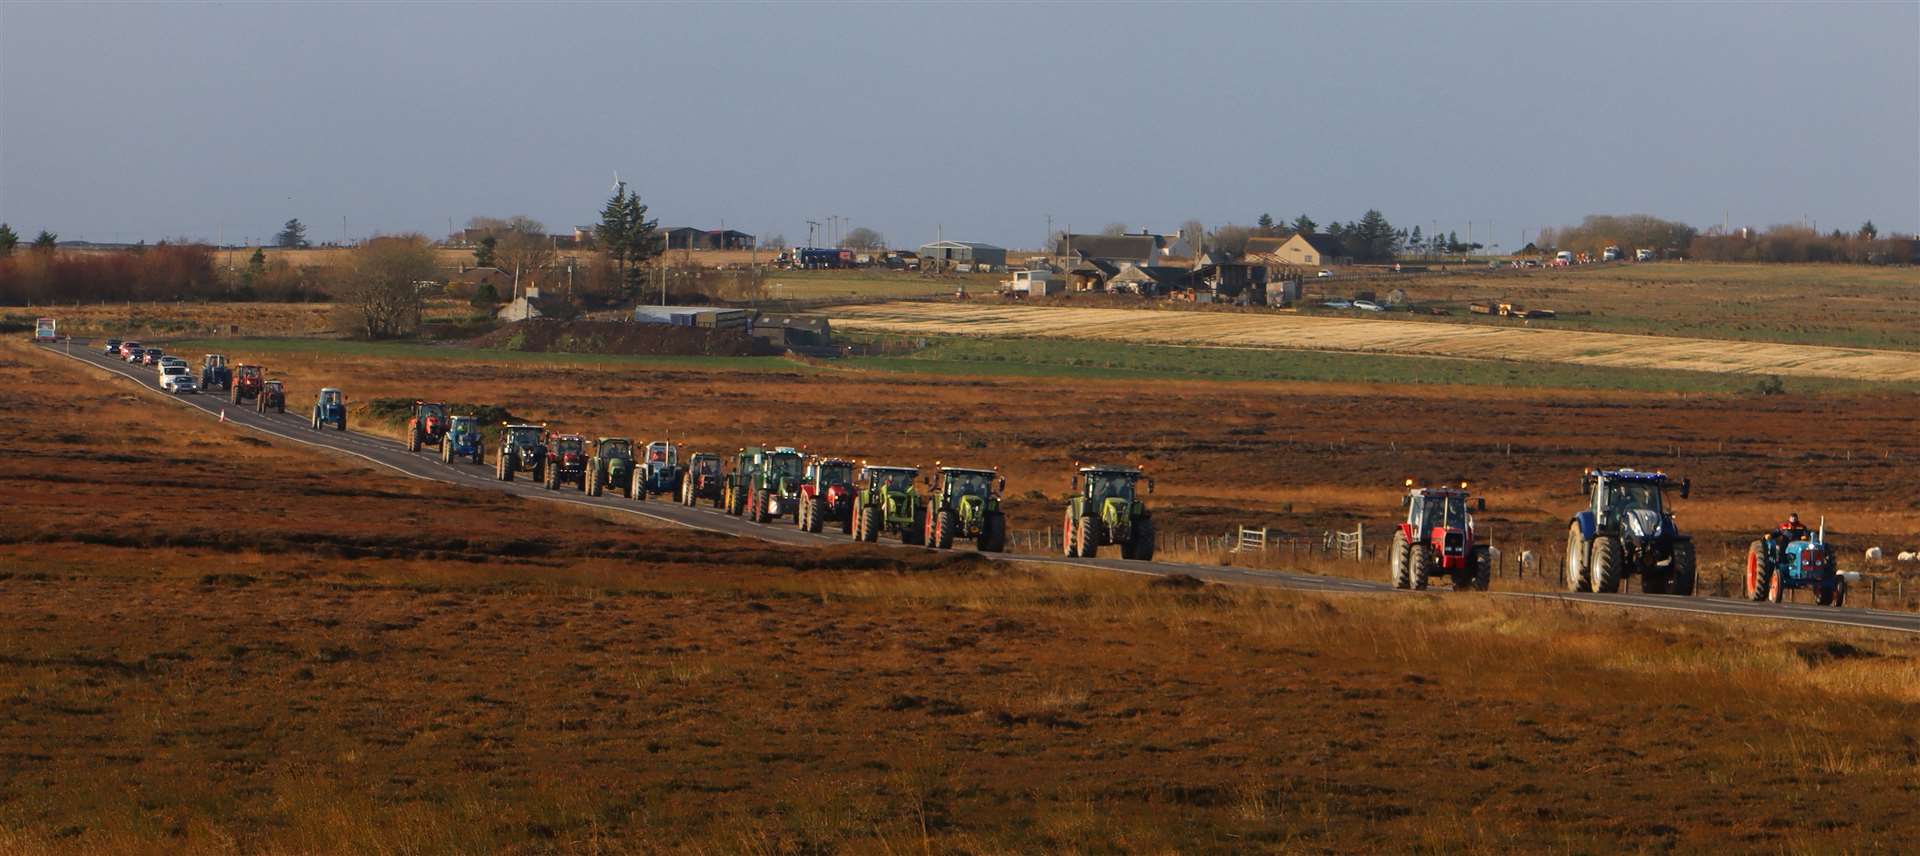 The convoy heading over the Killimster Moss road during Saturday's inaugural William Gunn Memorial Tractor Run. Picture: Neil Buchan